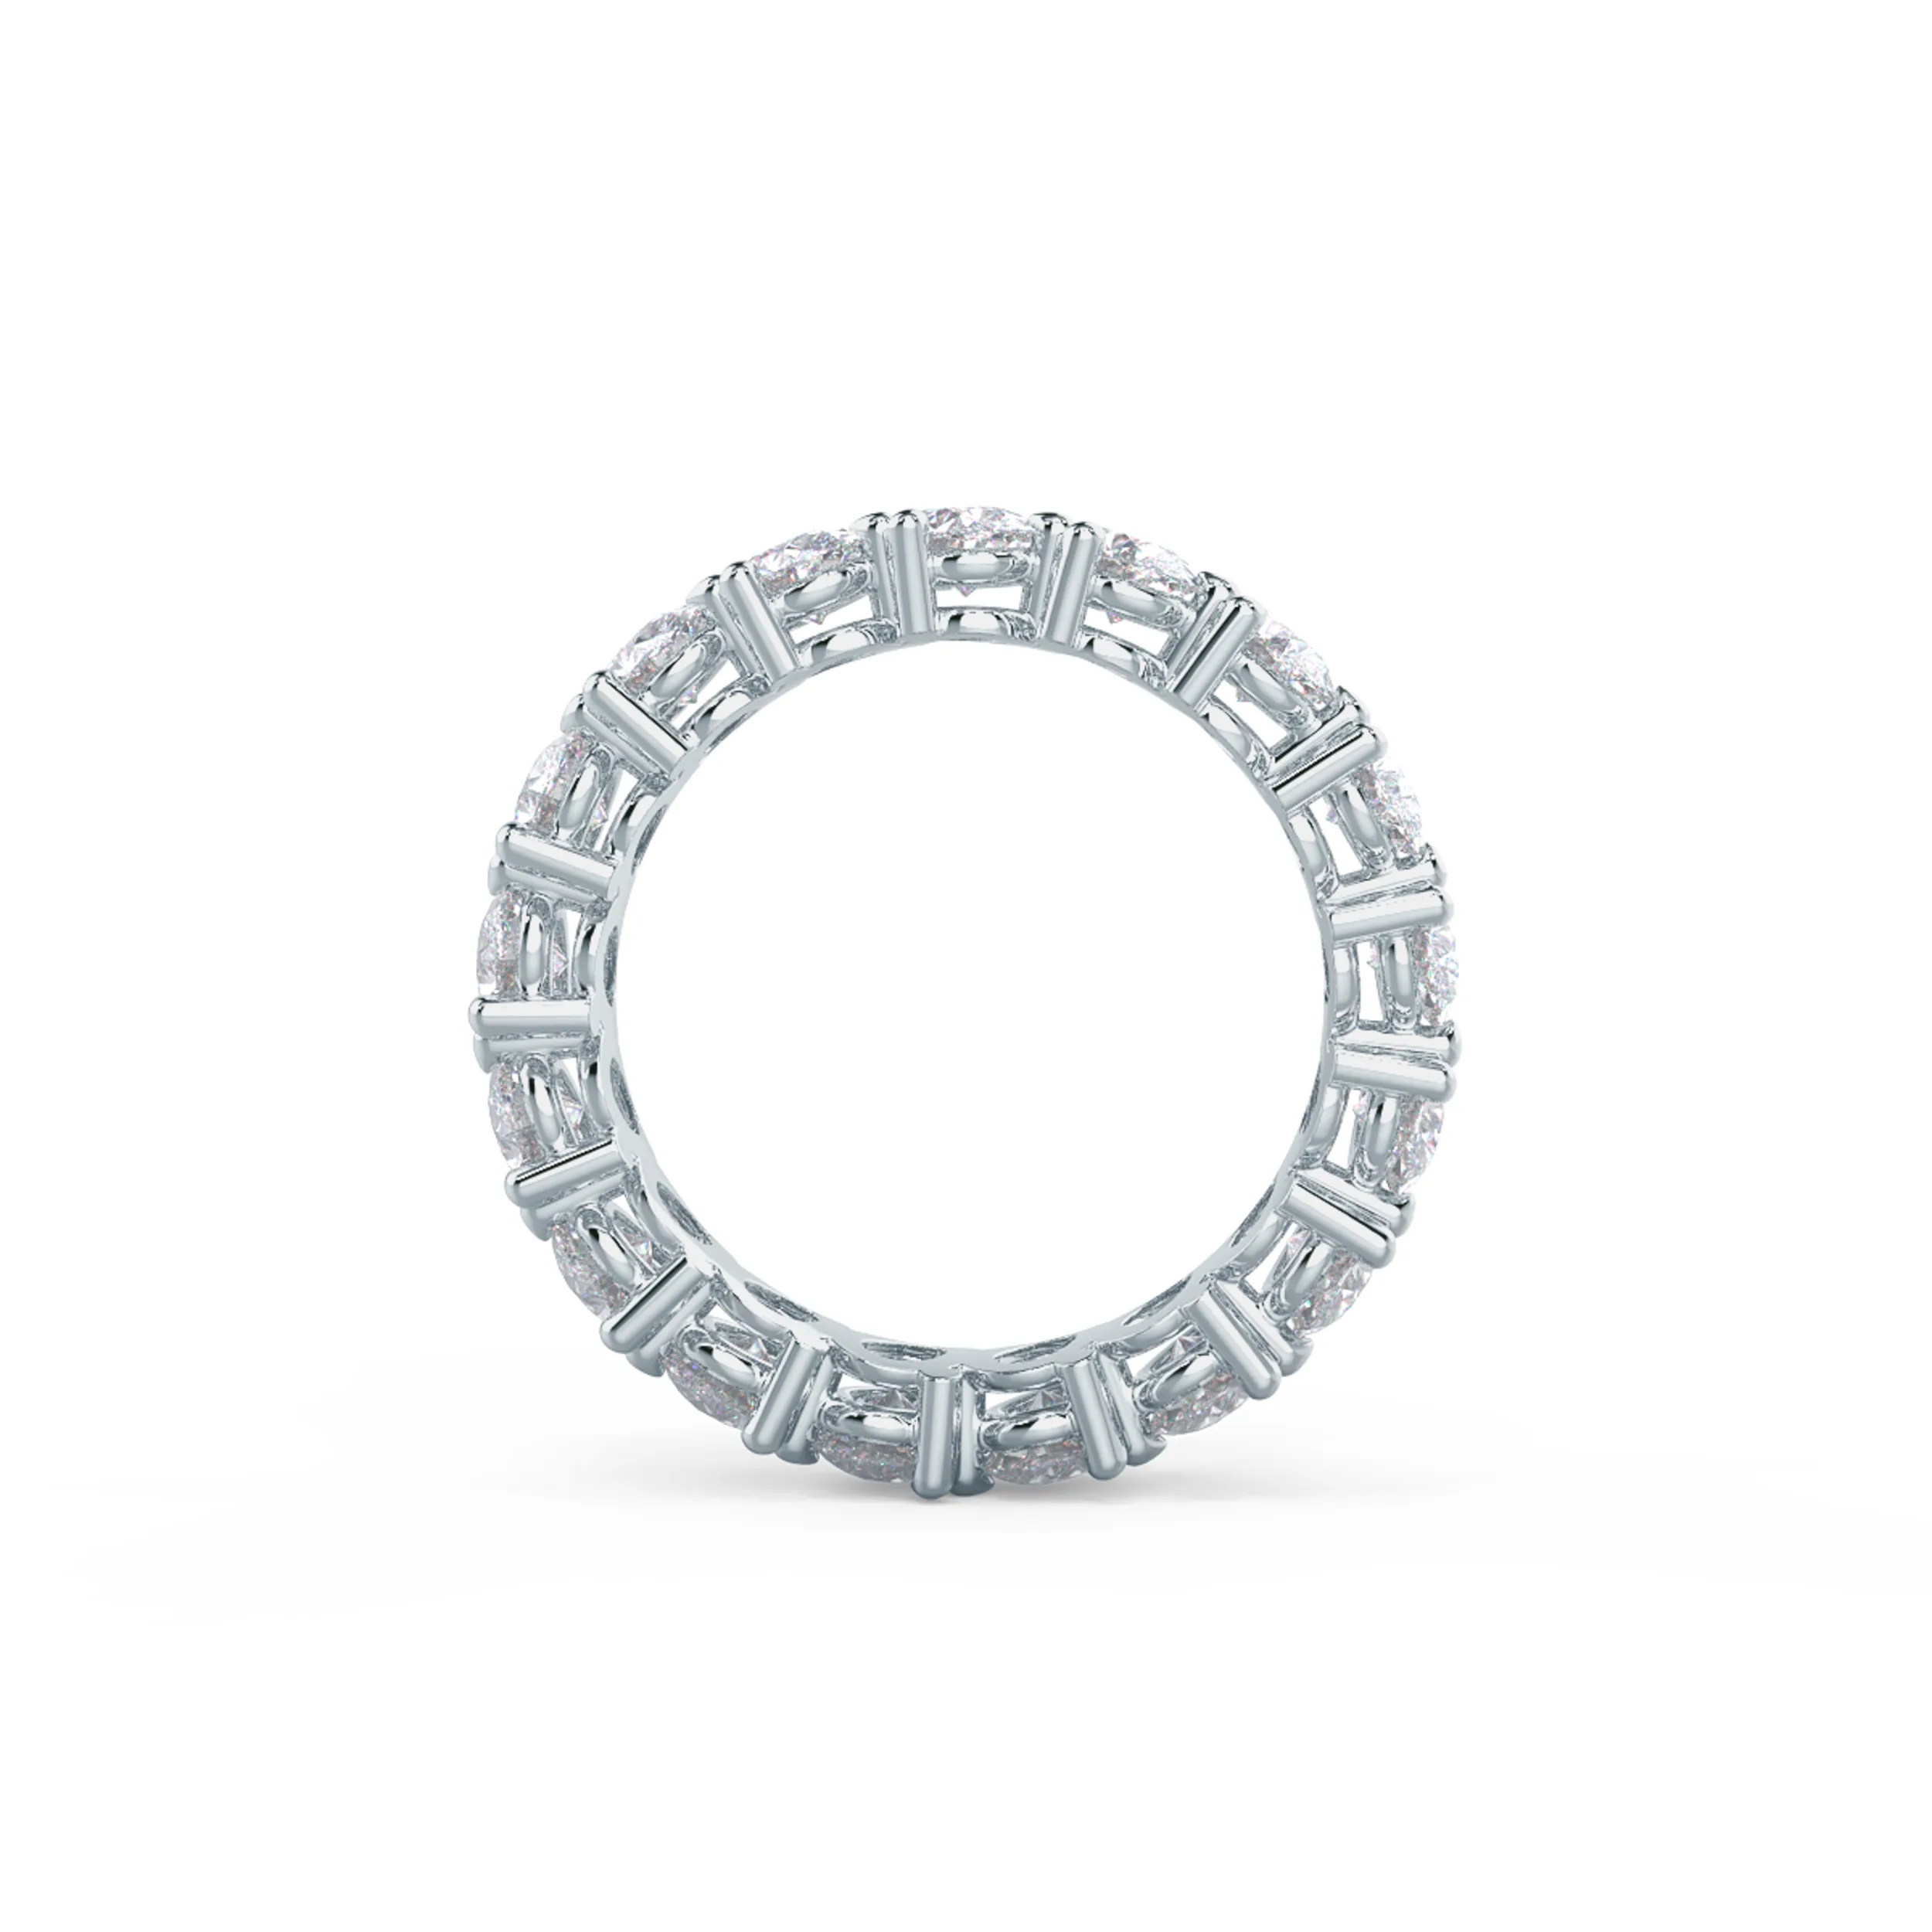 5.0 ctw Diamonds set in 18k White Gold Pear Angled Eternity Band (Profile View)